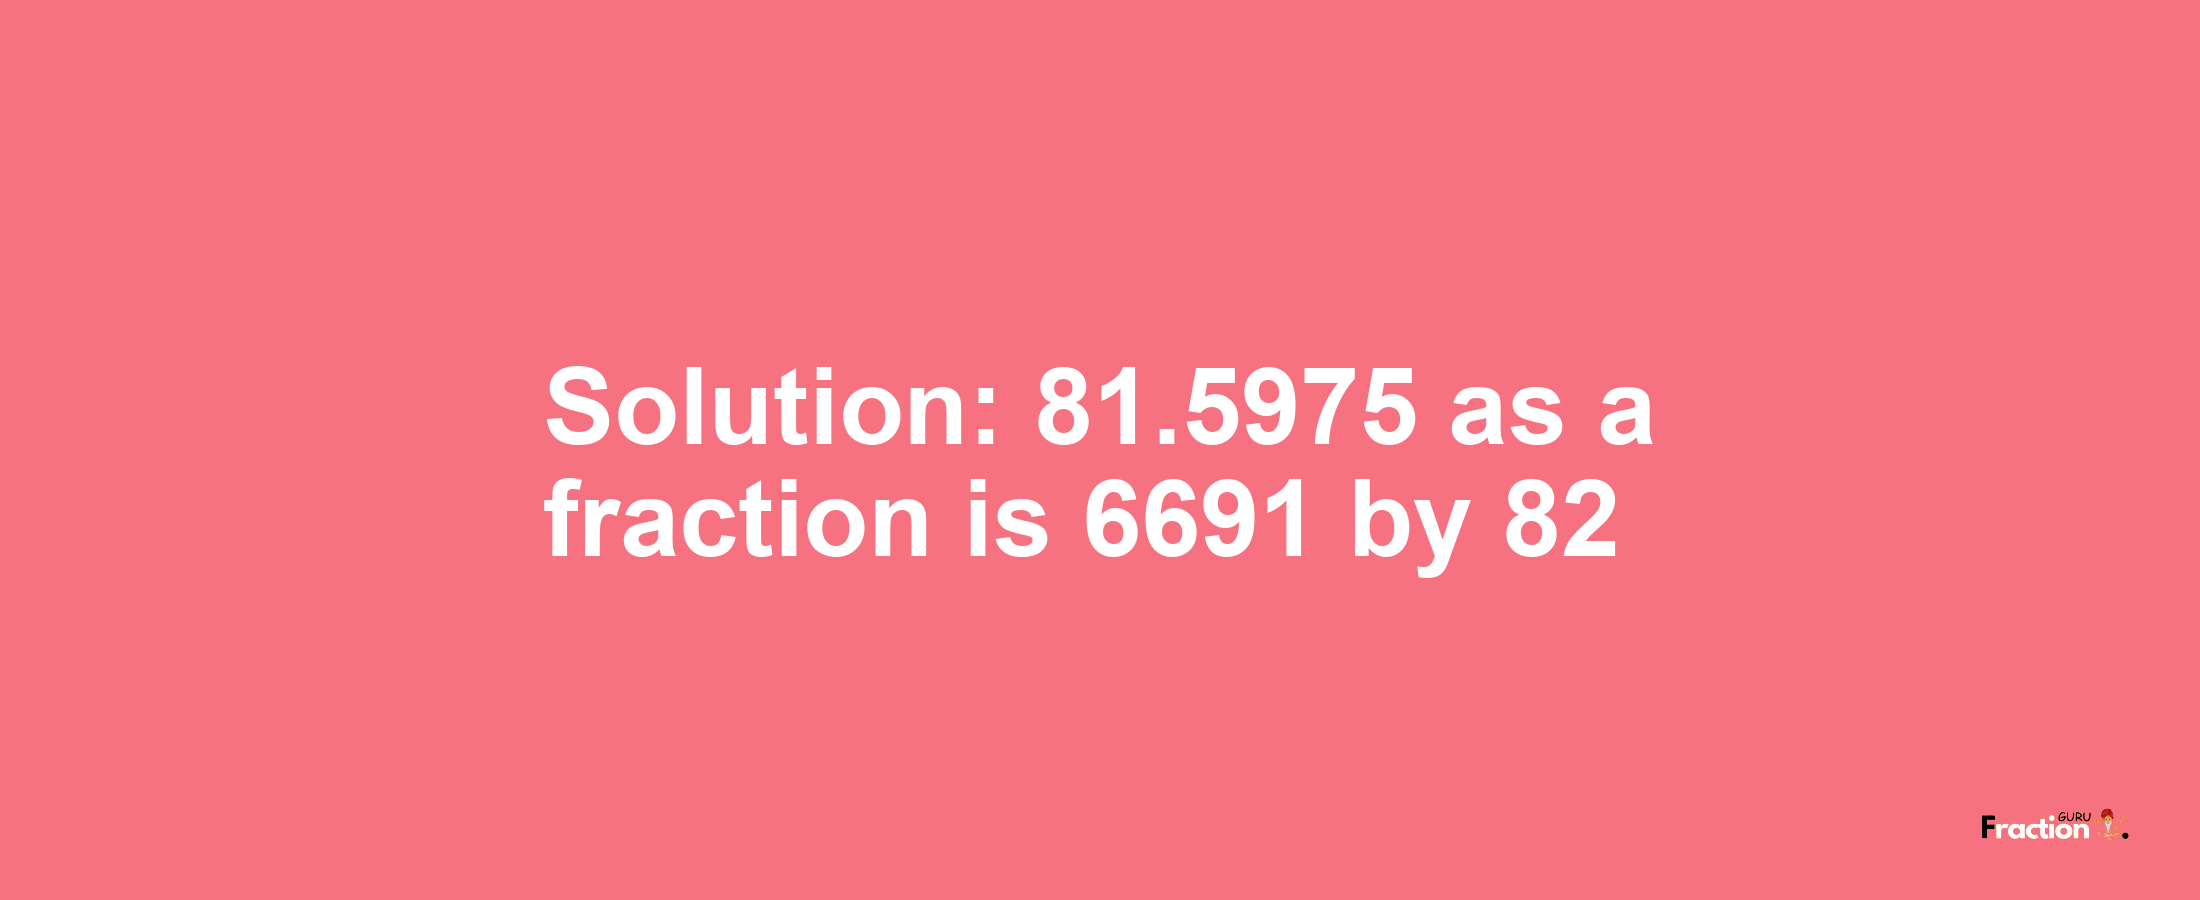 Solution:81.5975 as a fraction is 6691/82